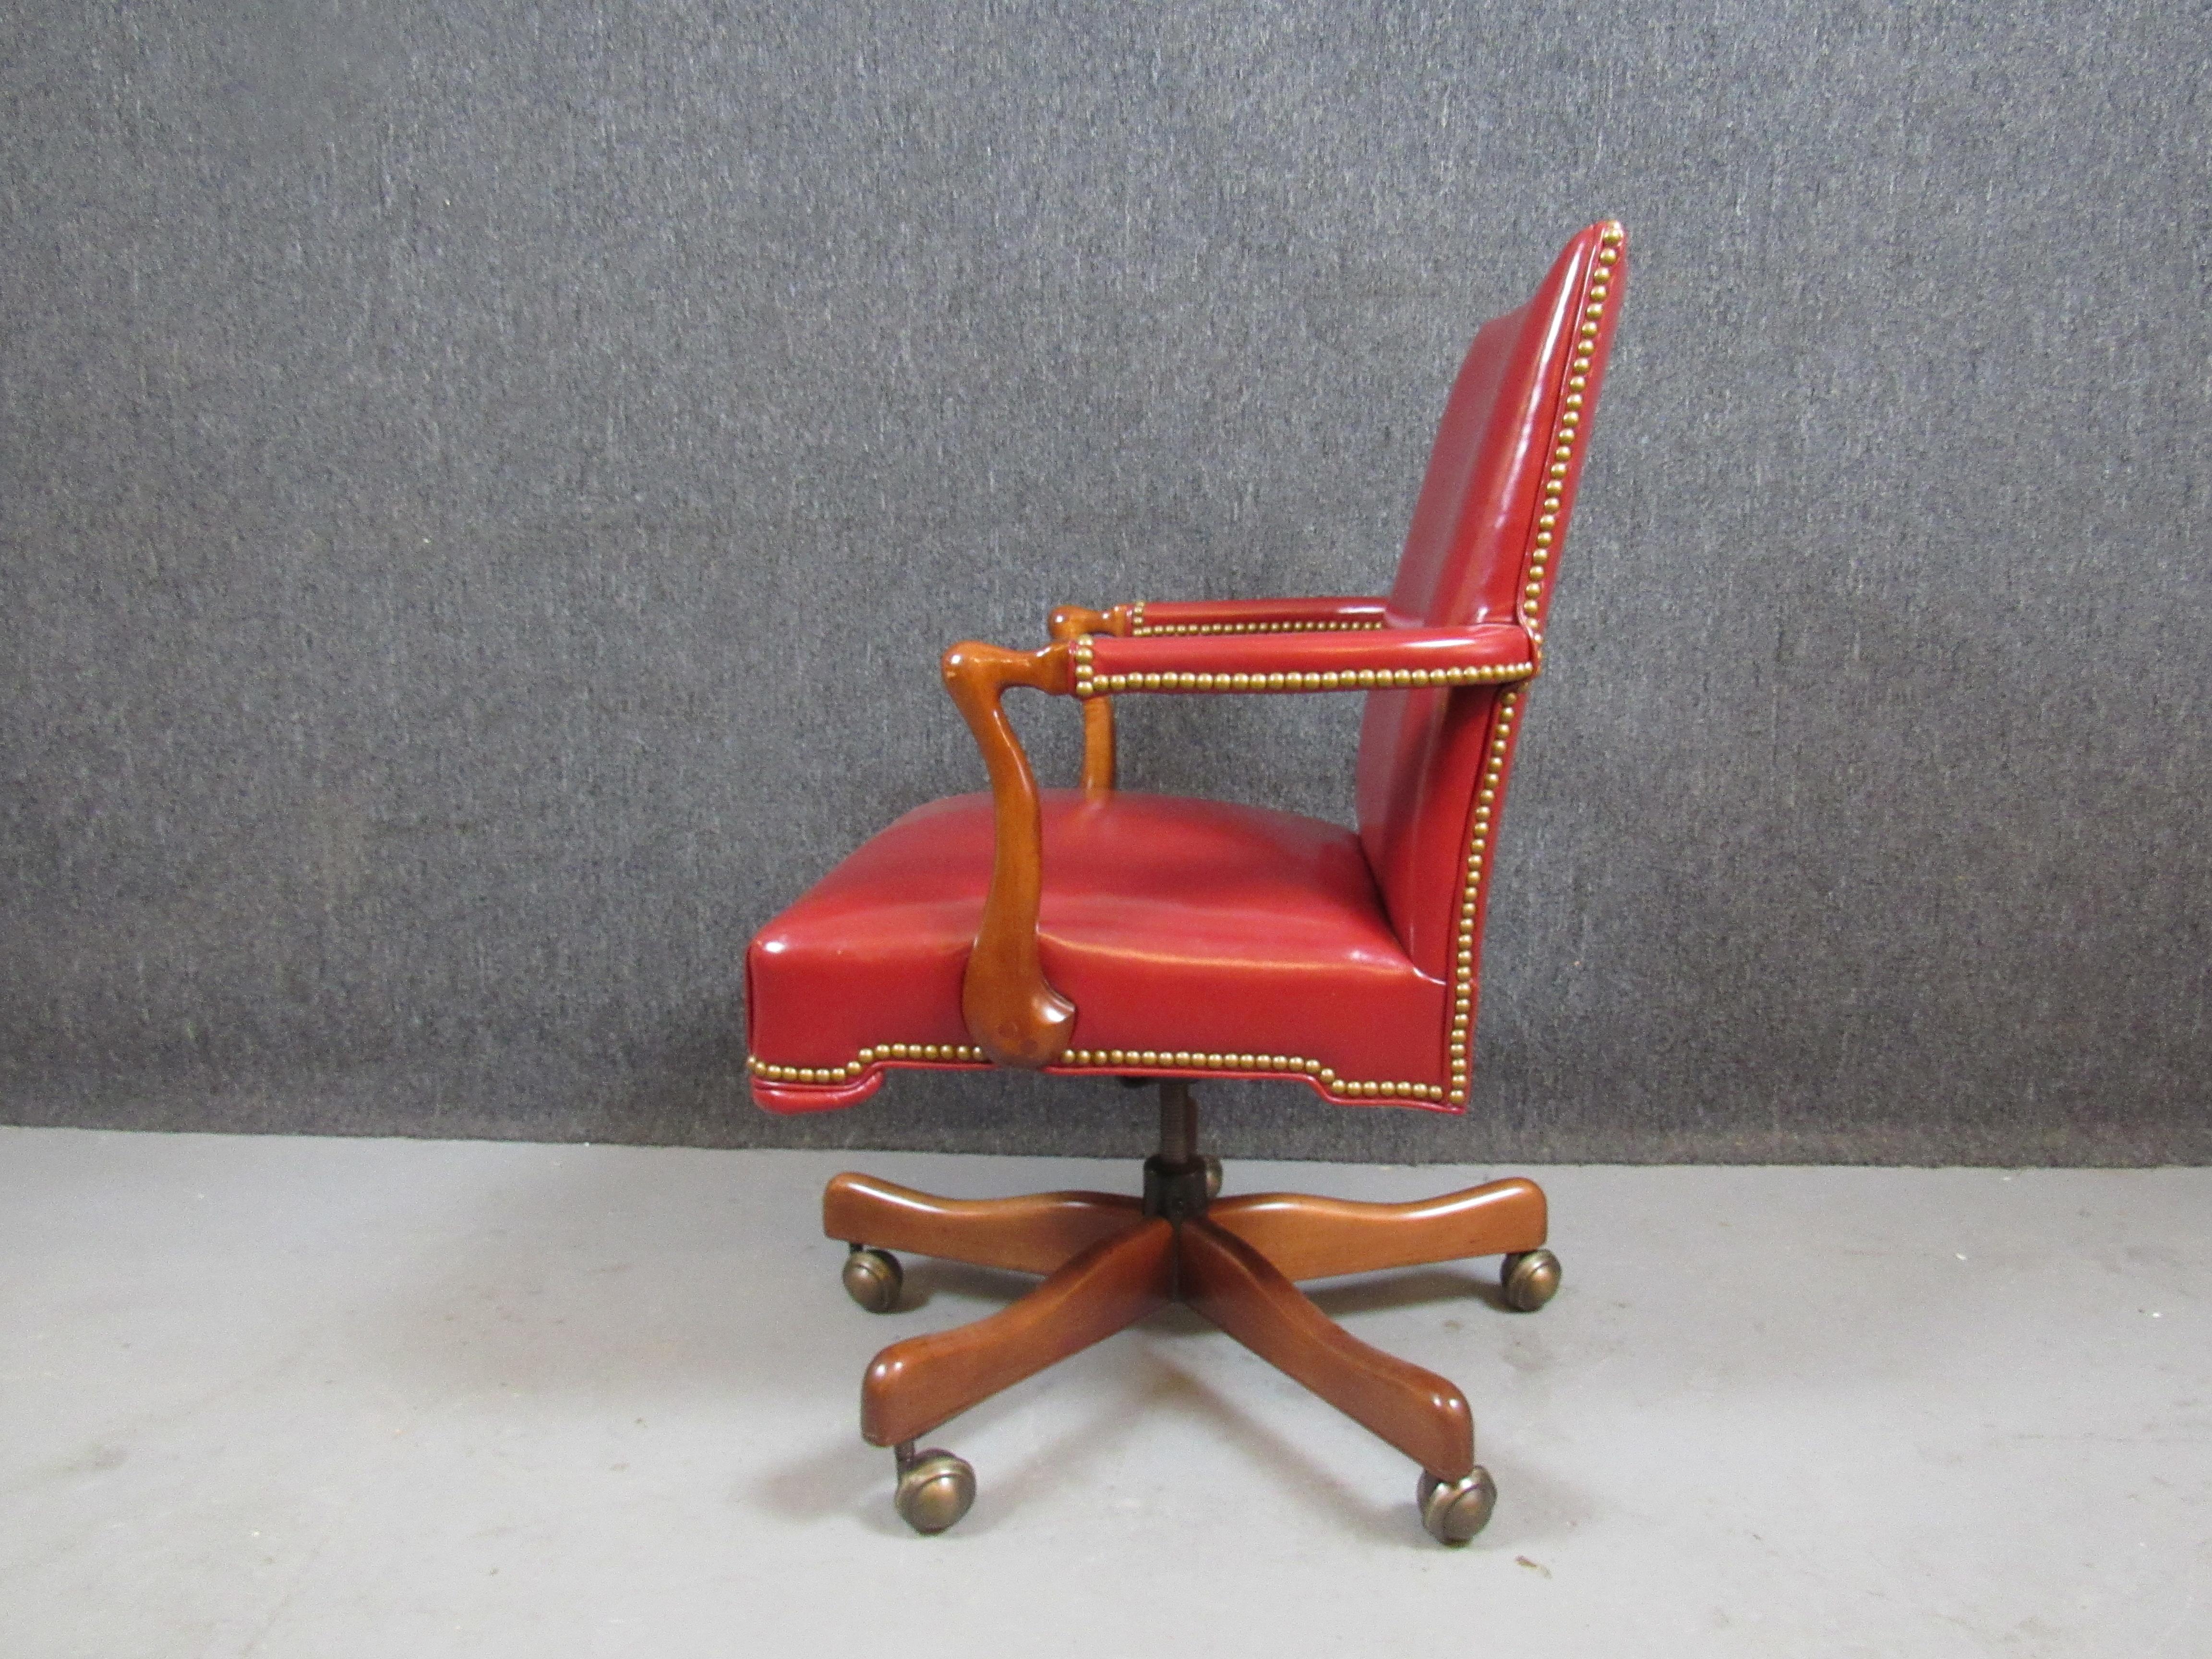 20th Century Vintage Red Leather Chesterfield Desk Chair by Thomasville